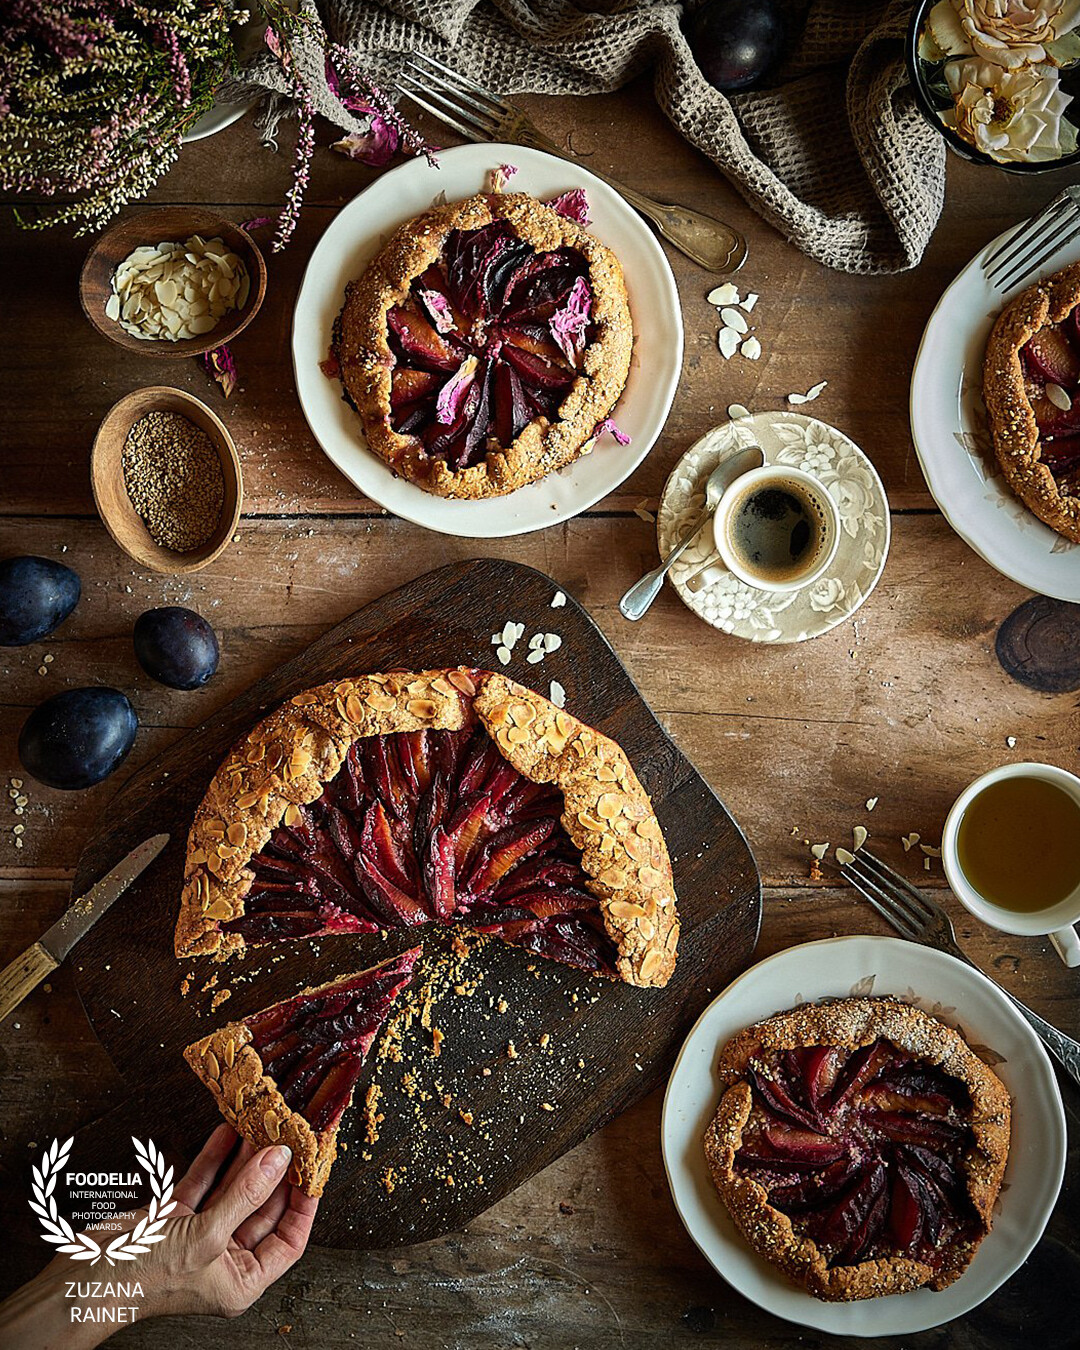 In this image I focused on capturing these home made plum galettes in a cosy rustic style using the vintage props shot a dark and moody atmosphere. My aim was to capture the galettes' structure and the fruits' juiciness. Shot with natural light.